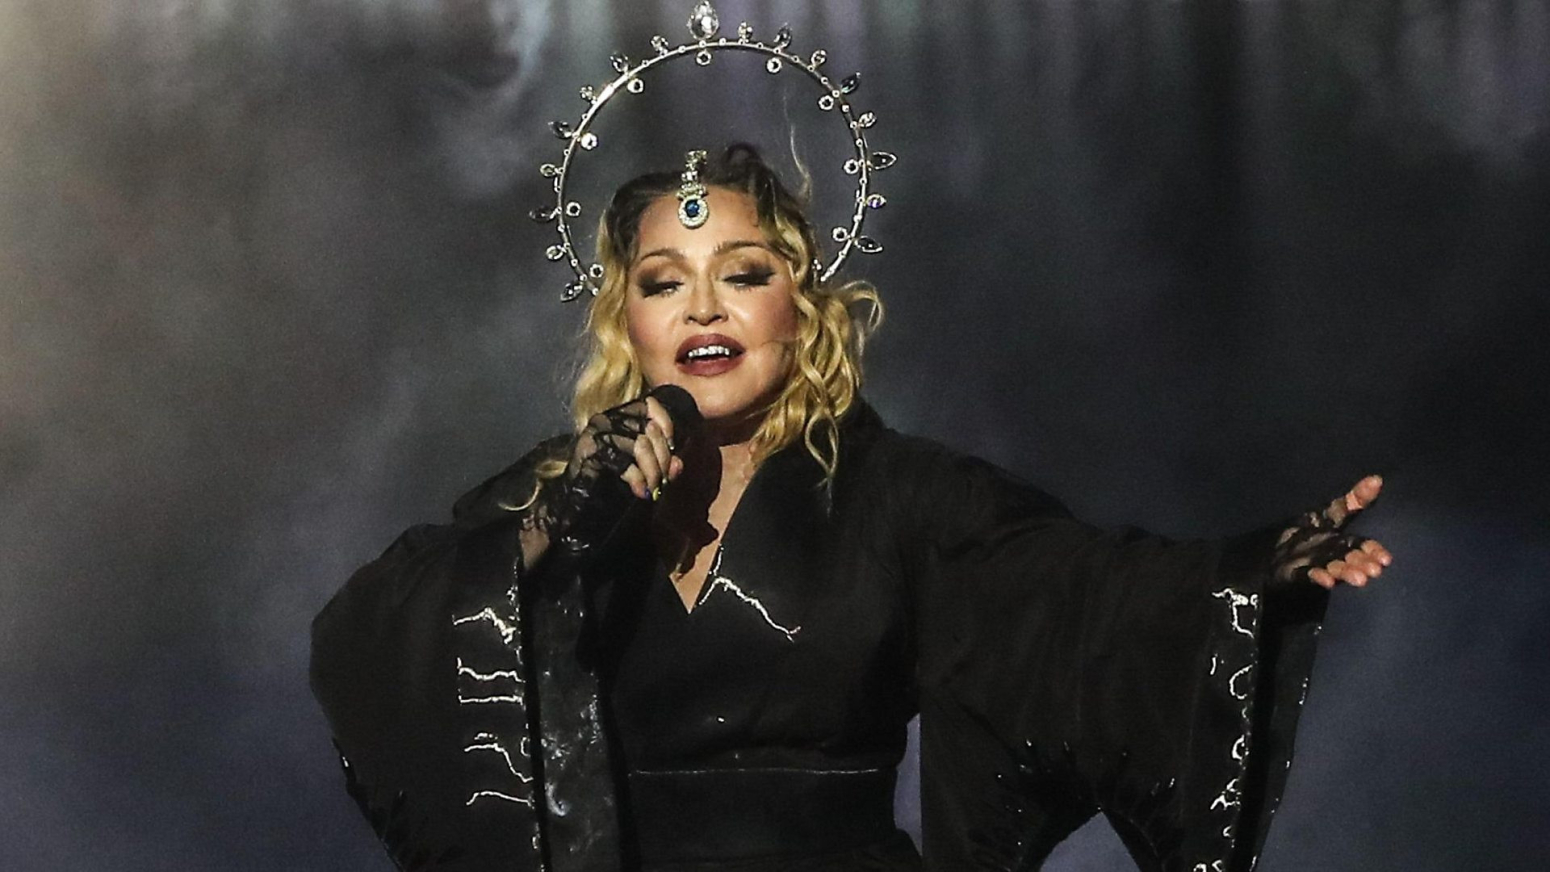 Watch: Madonna free beach gig attracts 1.6m people